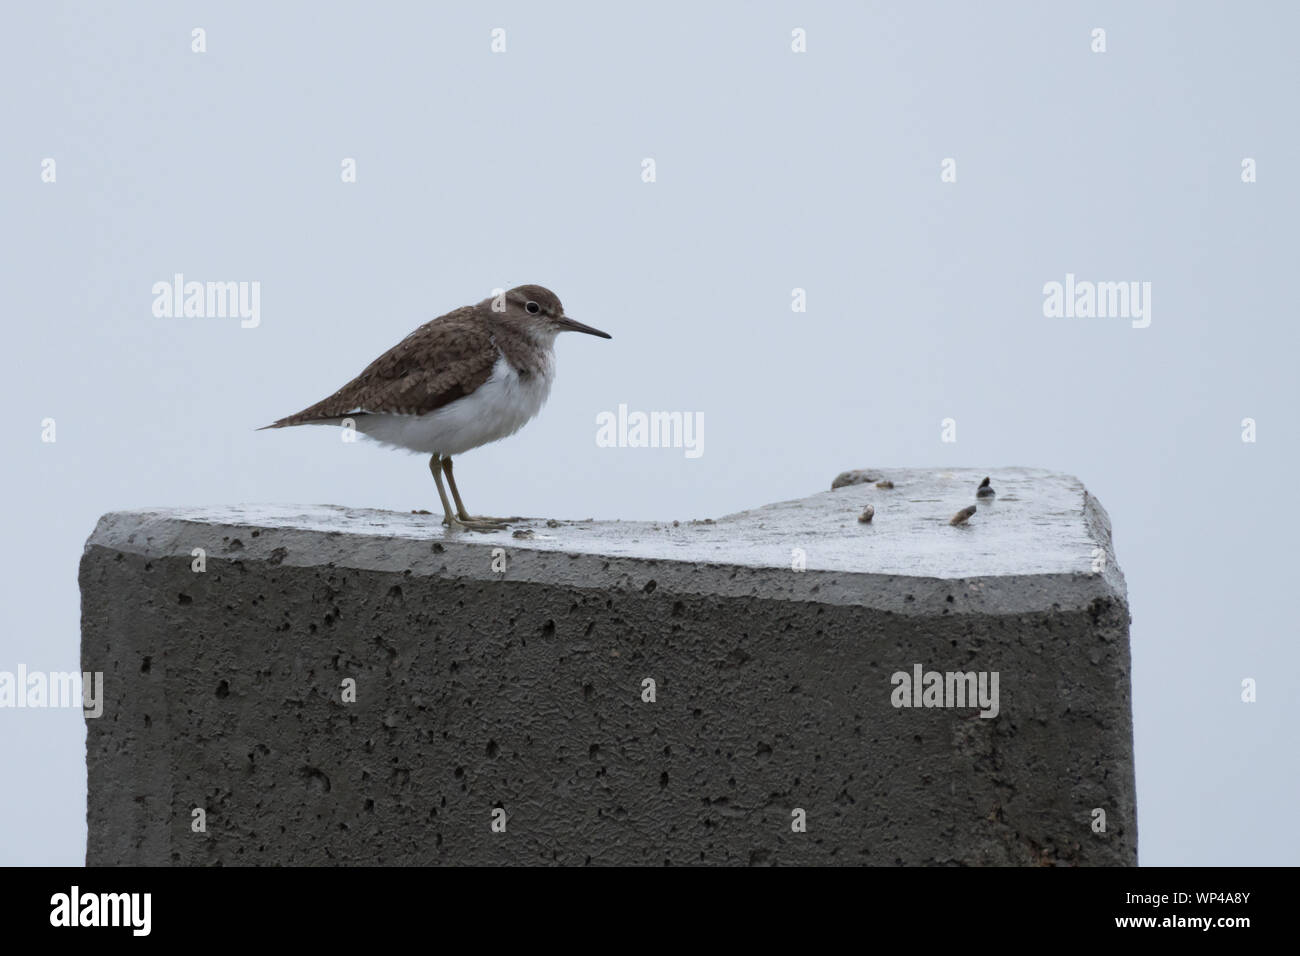 Common sandpiper (Actitis hypoleucos) sitting on a concrete pole during rainy weather. Finland, June 2018 Stock Photo